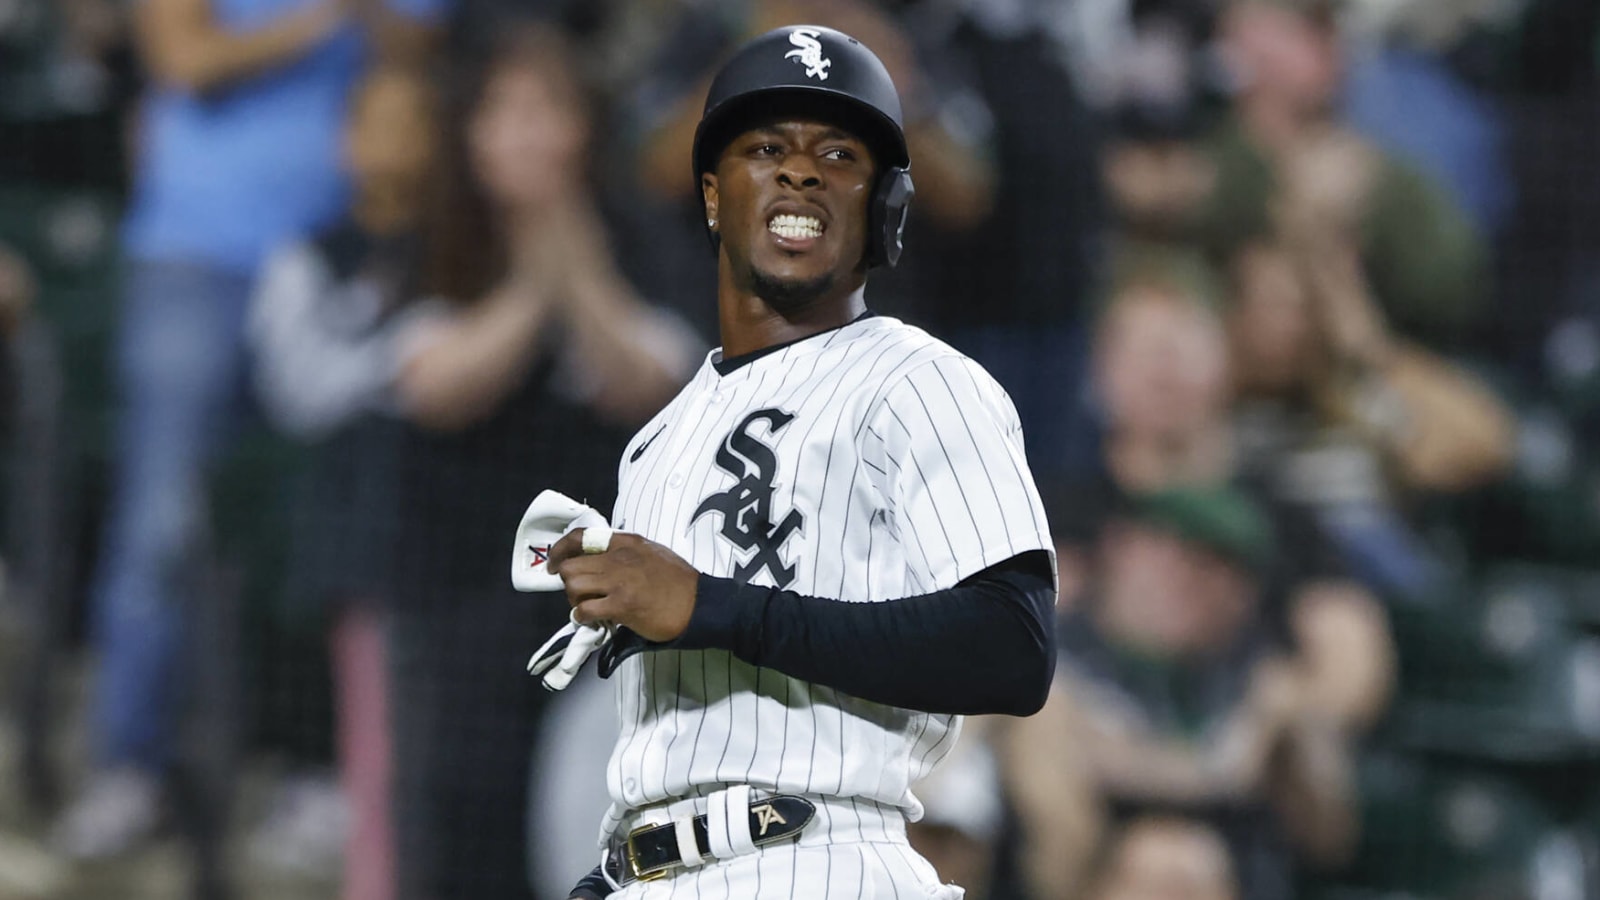 White Sox shortstop Tim Anderson entering an uncertain future